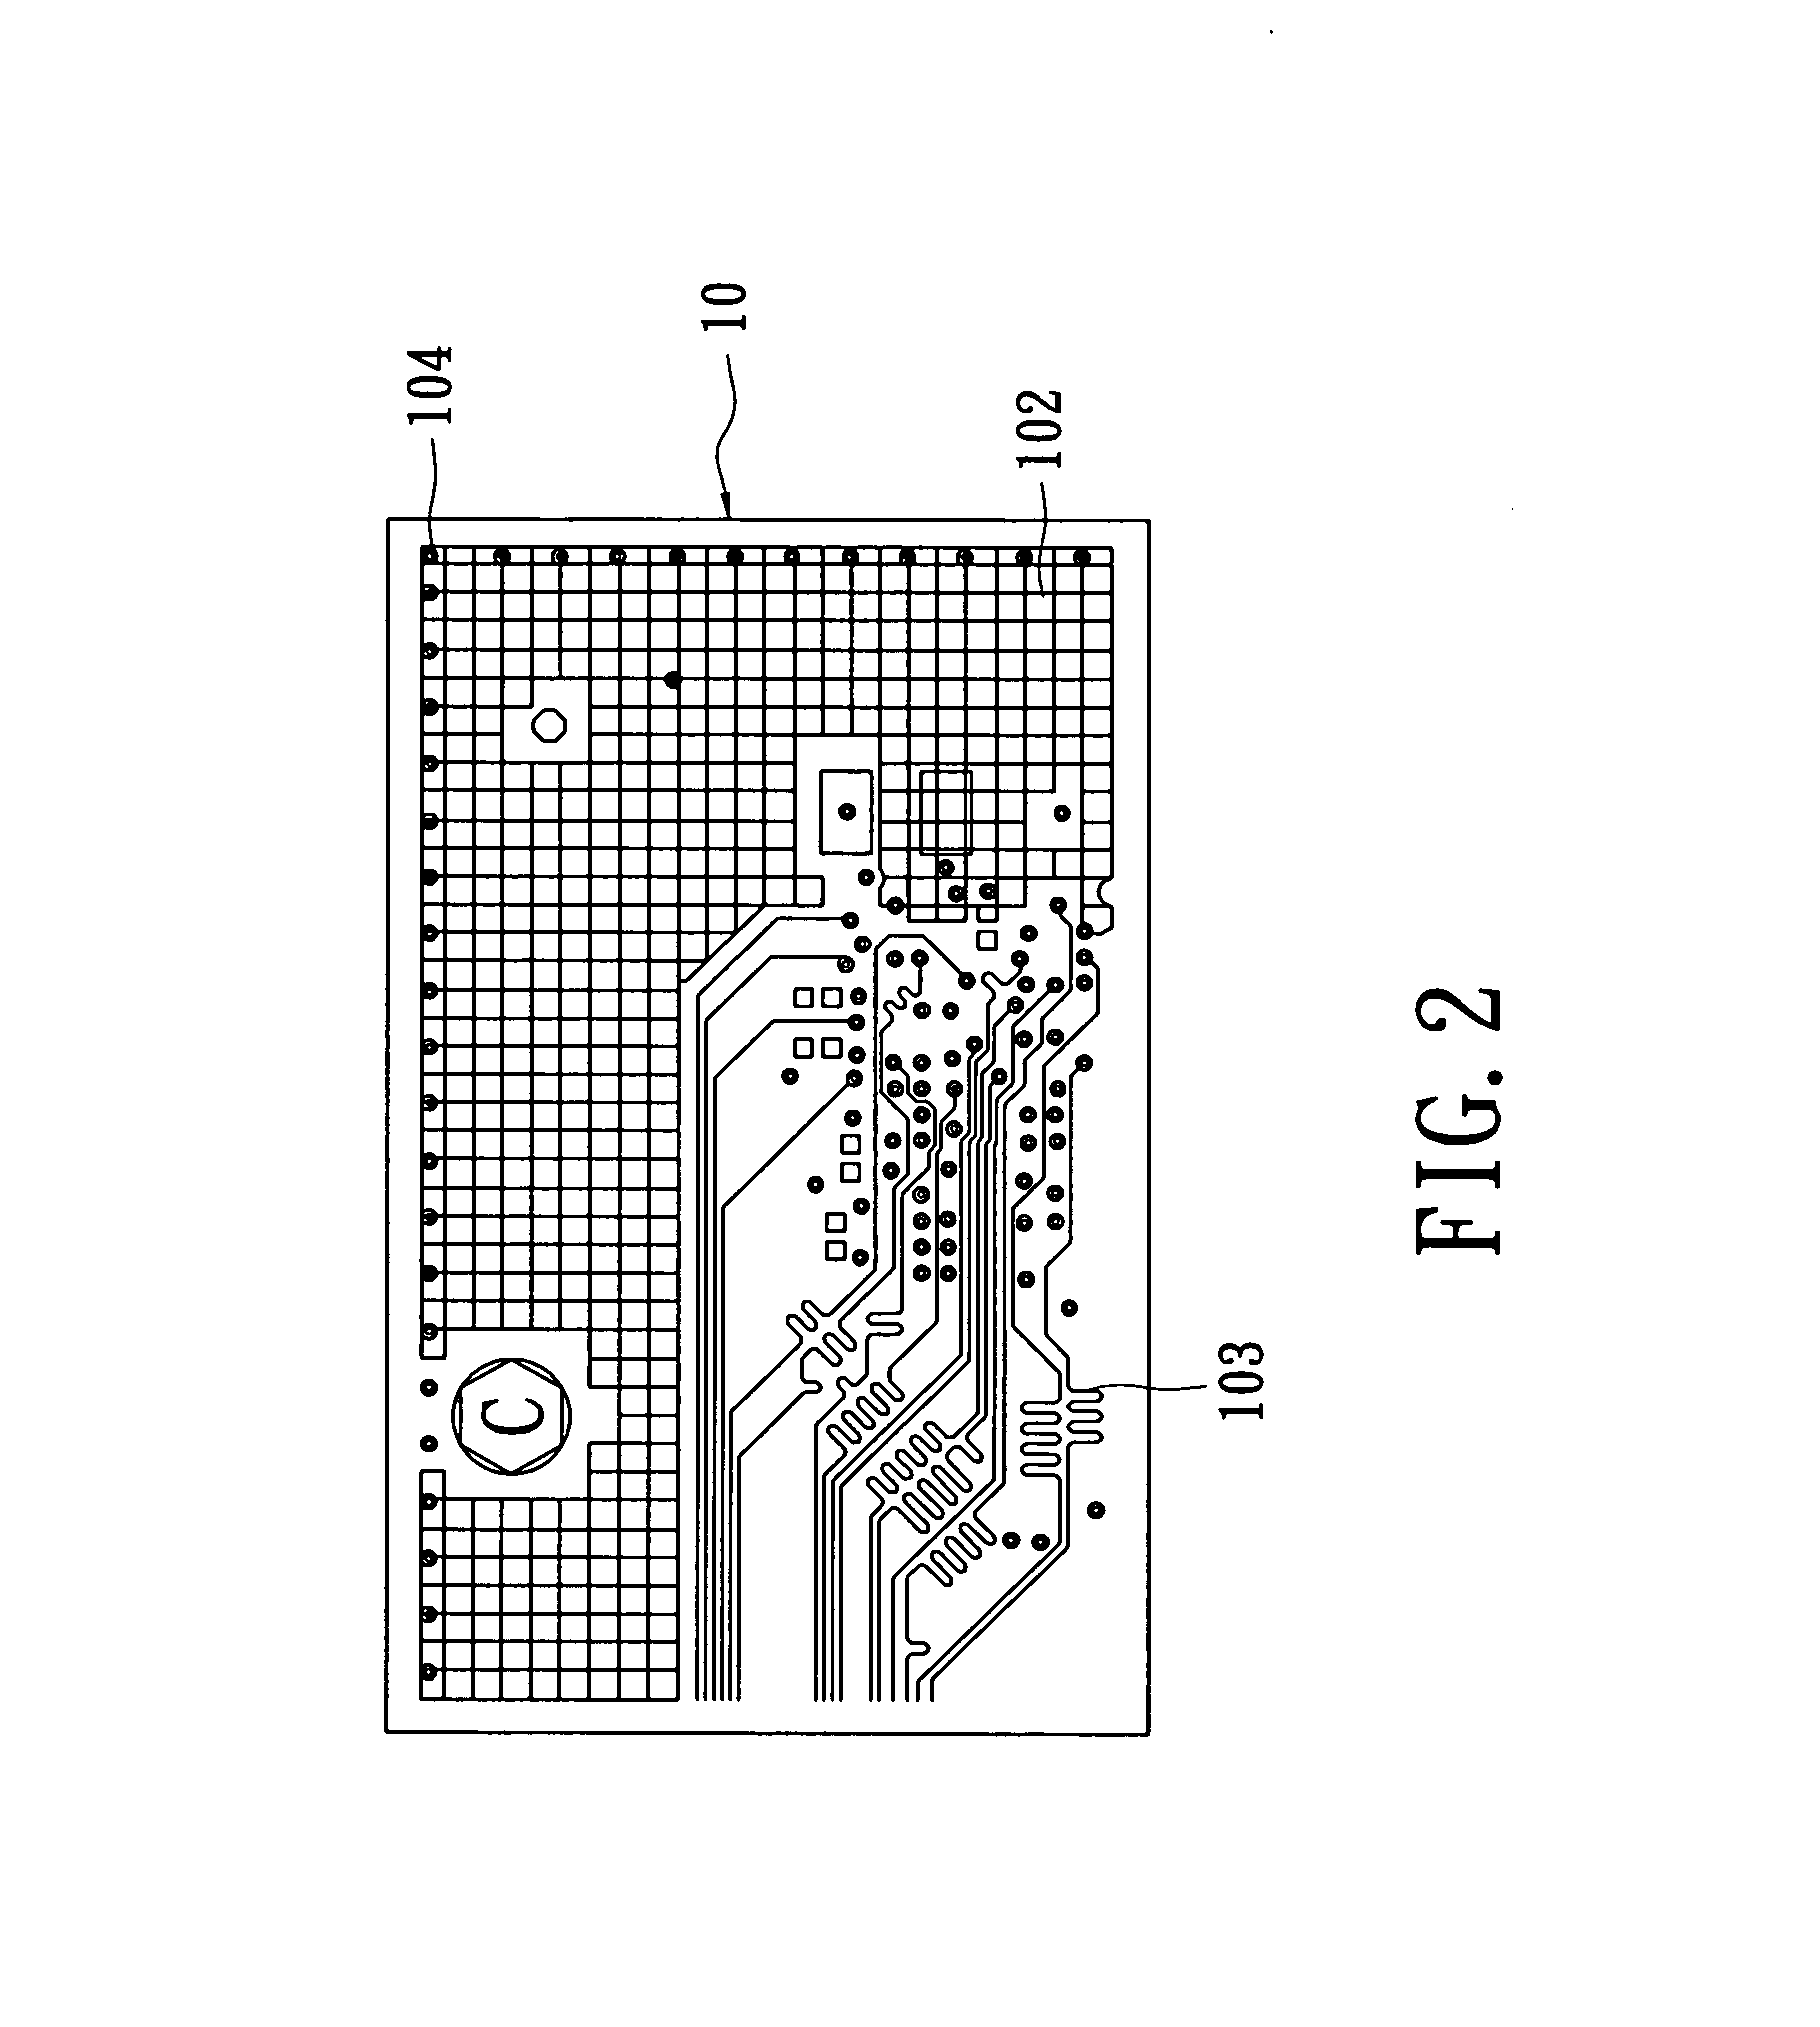 PCB layout structrue for suppressing EMI and method thereof